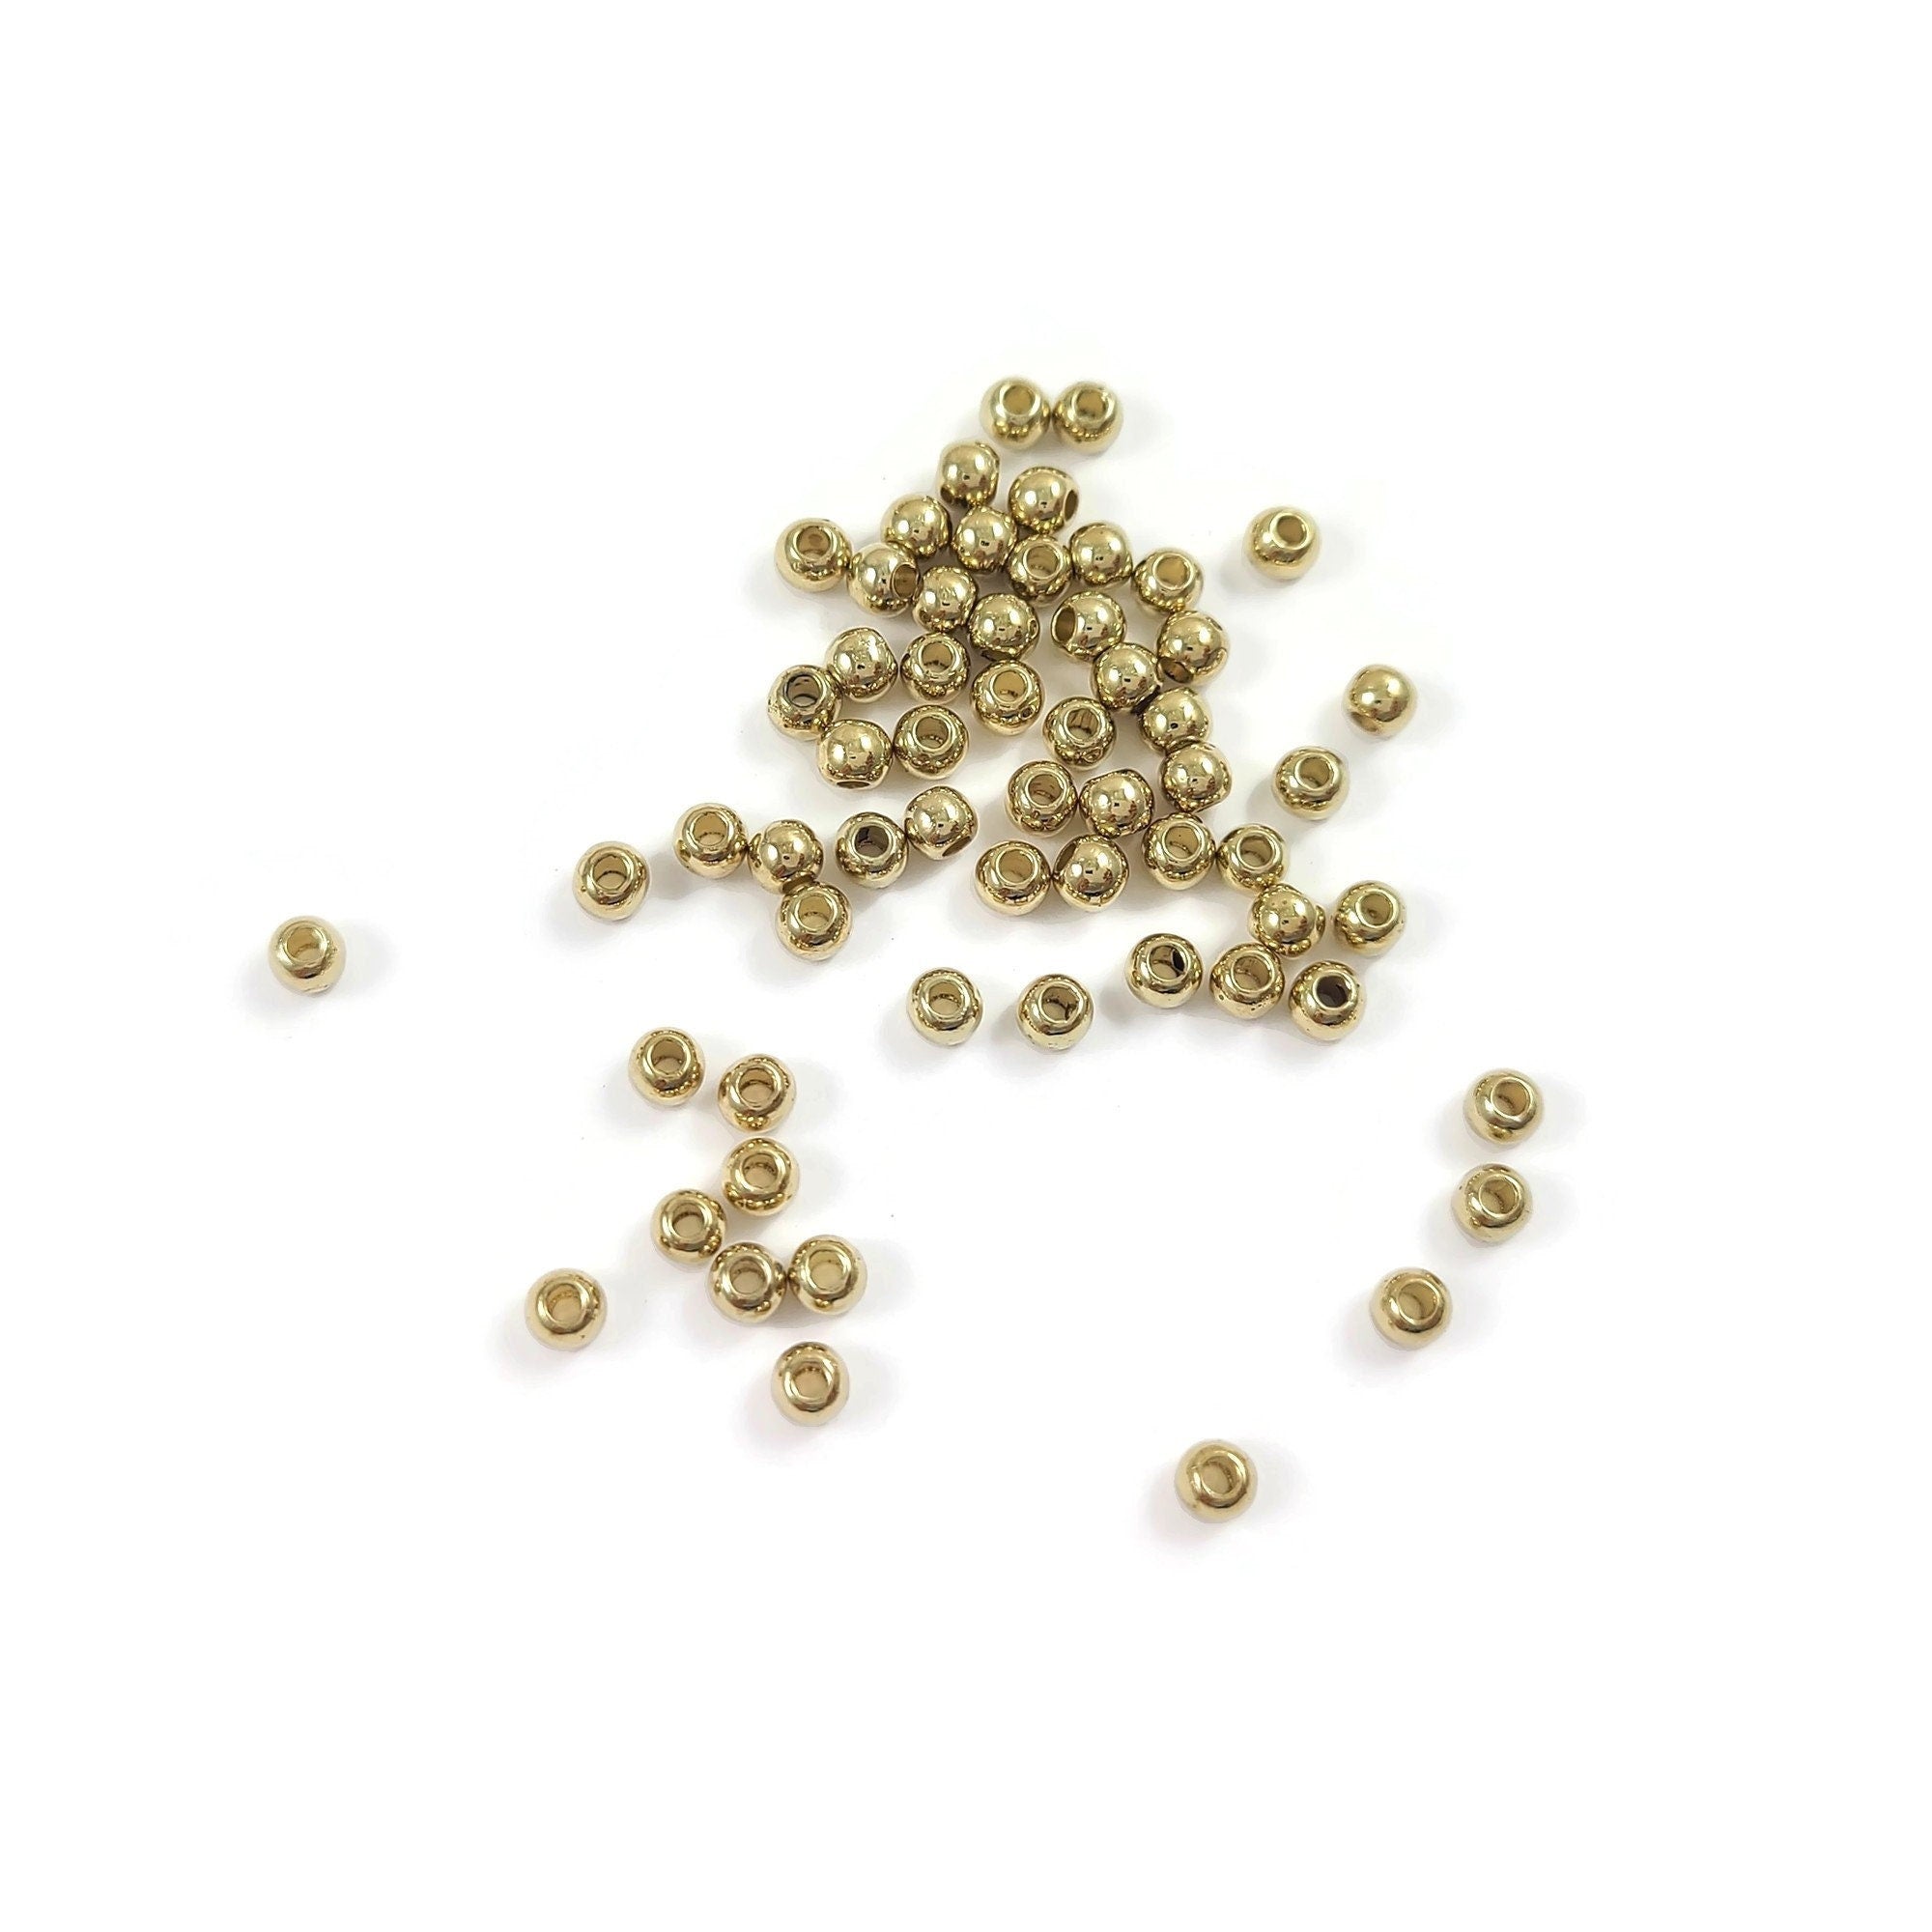 Tiny spacer round beads 3mm, Gold metallic seed bead, Jewelry making plastic beads